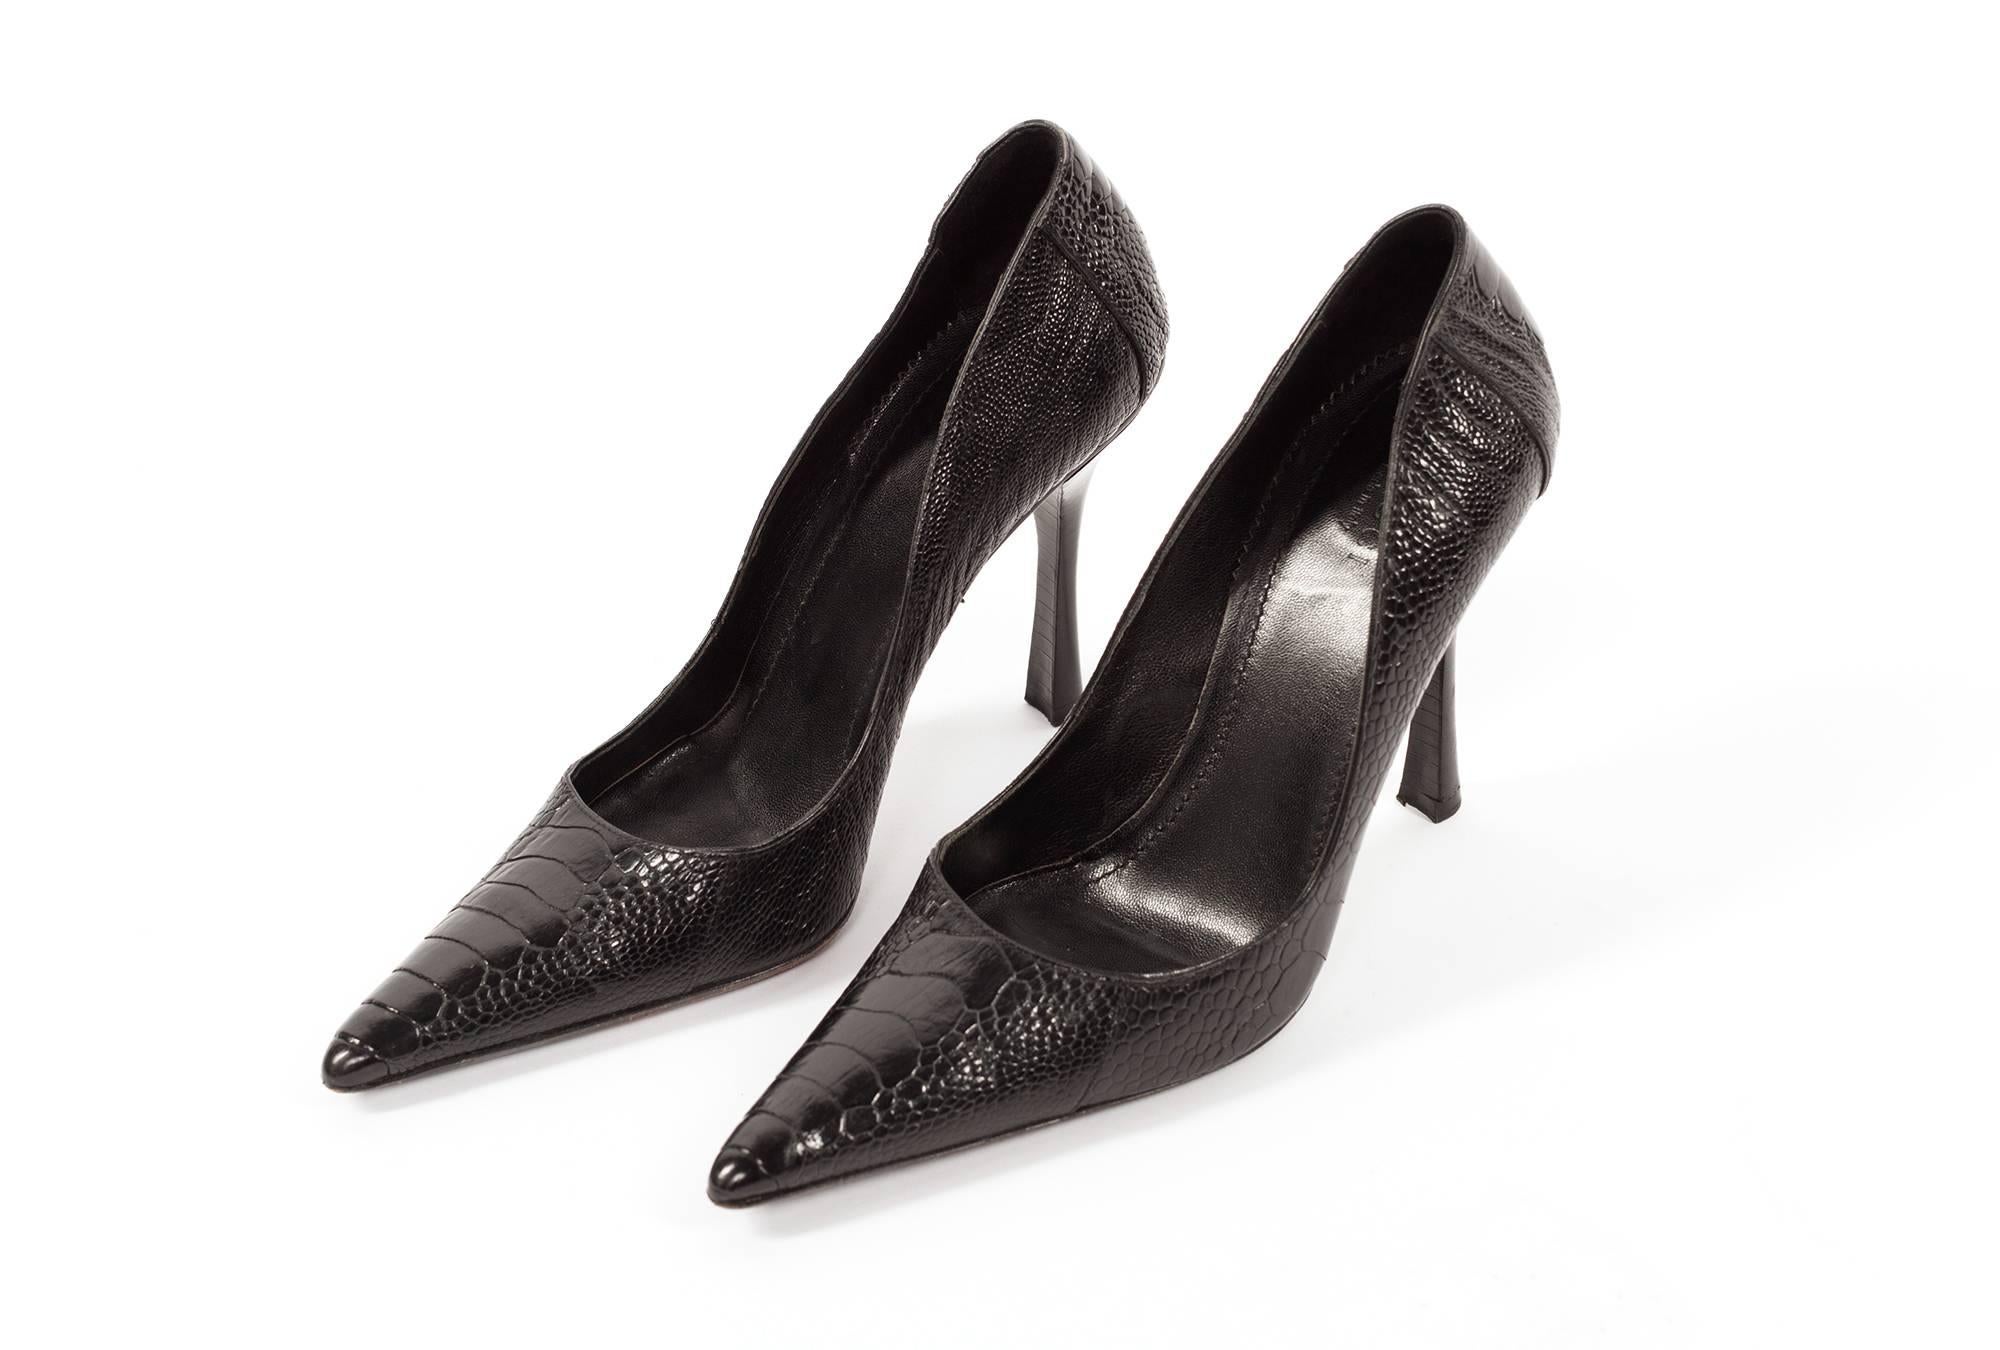 Gucci by Tom Ford Crocodile stilettos, with pointed fronts. Classic pointed stilettoes from the master of sexual vixens, Mr Tom Ford. High heels with extra pointed sexy fronts and this heel